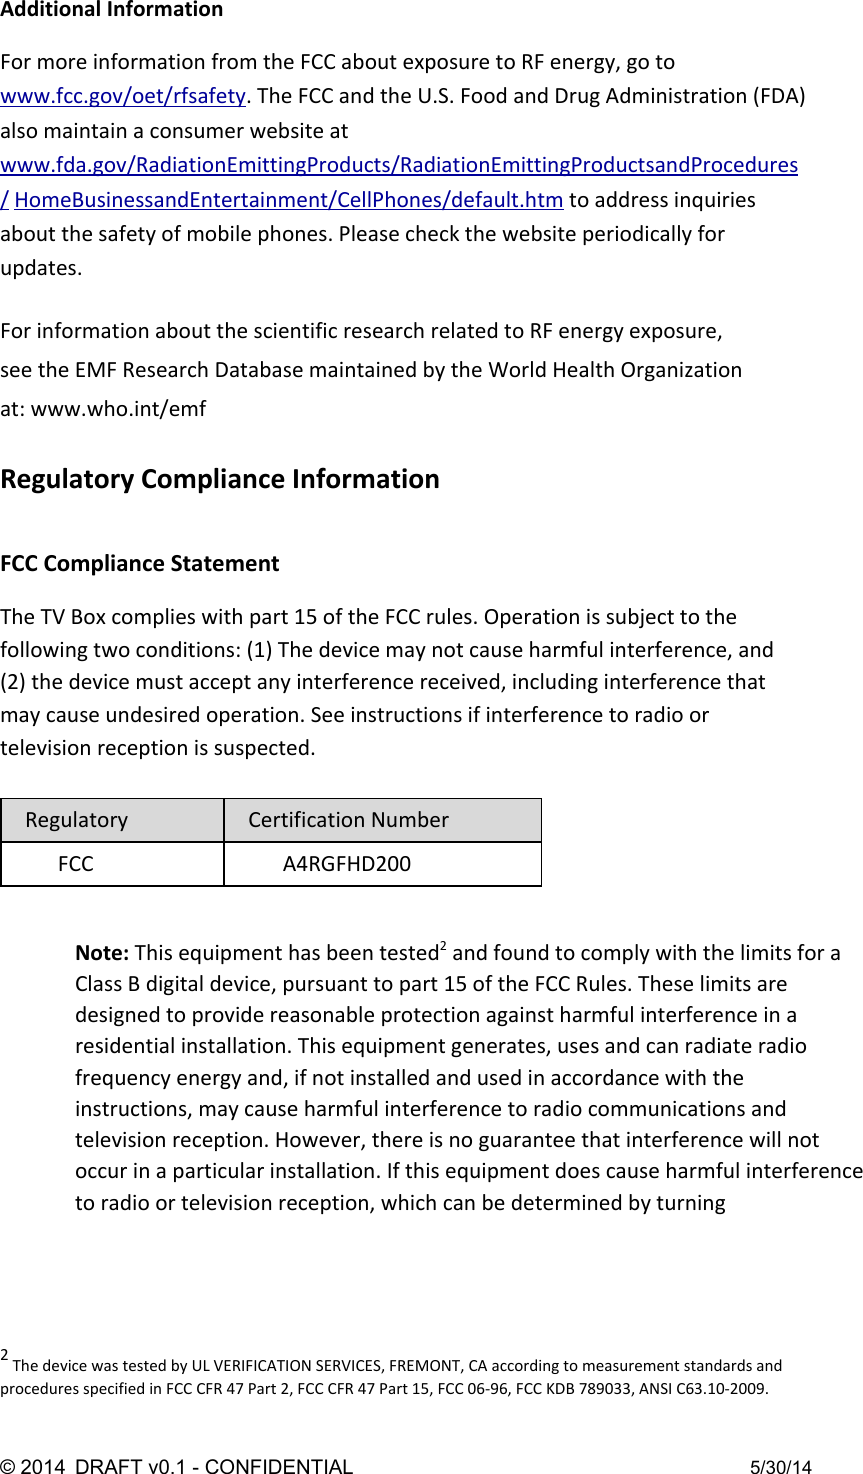 Additional Information  For more information from the FCC about exposure to RF energy, go to www.fcc.gov/oet/rfsafety. The FCC and the U.S. Food and Drug Administration (FDA) also maintain a consumer website at www.fda.gov/RadiationEmittingProducts/RadiationEmittingProductsandProcedures/ HomeBusinessandEntertainment/CellPhones/default.htm to address inquiries about the safety of mobile phones. Please check the website periodically for updates.  For information about the scientific research related to RF energy exposure, see the EMF Research Database maintained by the World Health Organization at: www.who.int/emf  Regulatory Compliance Information  FCC Compliance Statement  The TV Box complies with part 15 of the FCC rules. Operation is subject to the following two conditions: (1) The device may not cause harmful interference, and (2) the device must accept any interference received, including interference that may cause undesired operation. See instructions if interference to radio or television reception is suspected.  Regulatory Certification Number FCC A4RGFHD200   Note: This equipment has been tested2 and found to comply with the limits for a Class B digital device, pursuant to part 15 of the FCC Rules. These limits are designed to provide reasonable protection against harmful interference in a residential installation. This equipment generates, uses and can radiate radio frequency energy and, if not installed and used in accordance with the instructions, may cause harmful interference to radio communications and television reception. However, there is no guarantee that interference will not occur in a particular installation. If this equipment does cause harmful interference to radio or television reception, which can be determined by turning      2 The device was tested by UL VERIFICATION SERVICES, FREMONT, CA according to measurement standards and procedures specified in FCC CFR 47 Part 2, FCC CFR 47 Part 15, FCC 06-96, FCC KDB 789033, ANSI C63.10-2009.  ©2014 DRAFTv0.1CONFIDENTIAL 5/30/14 